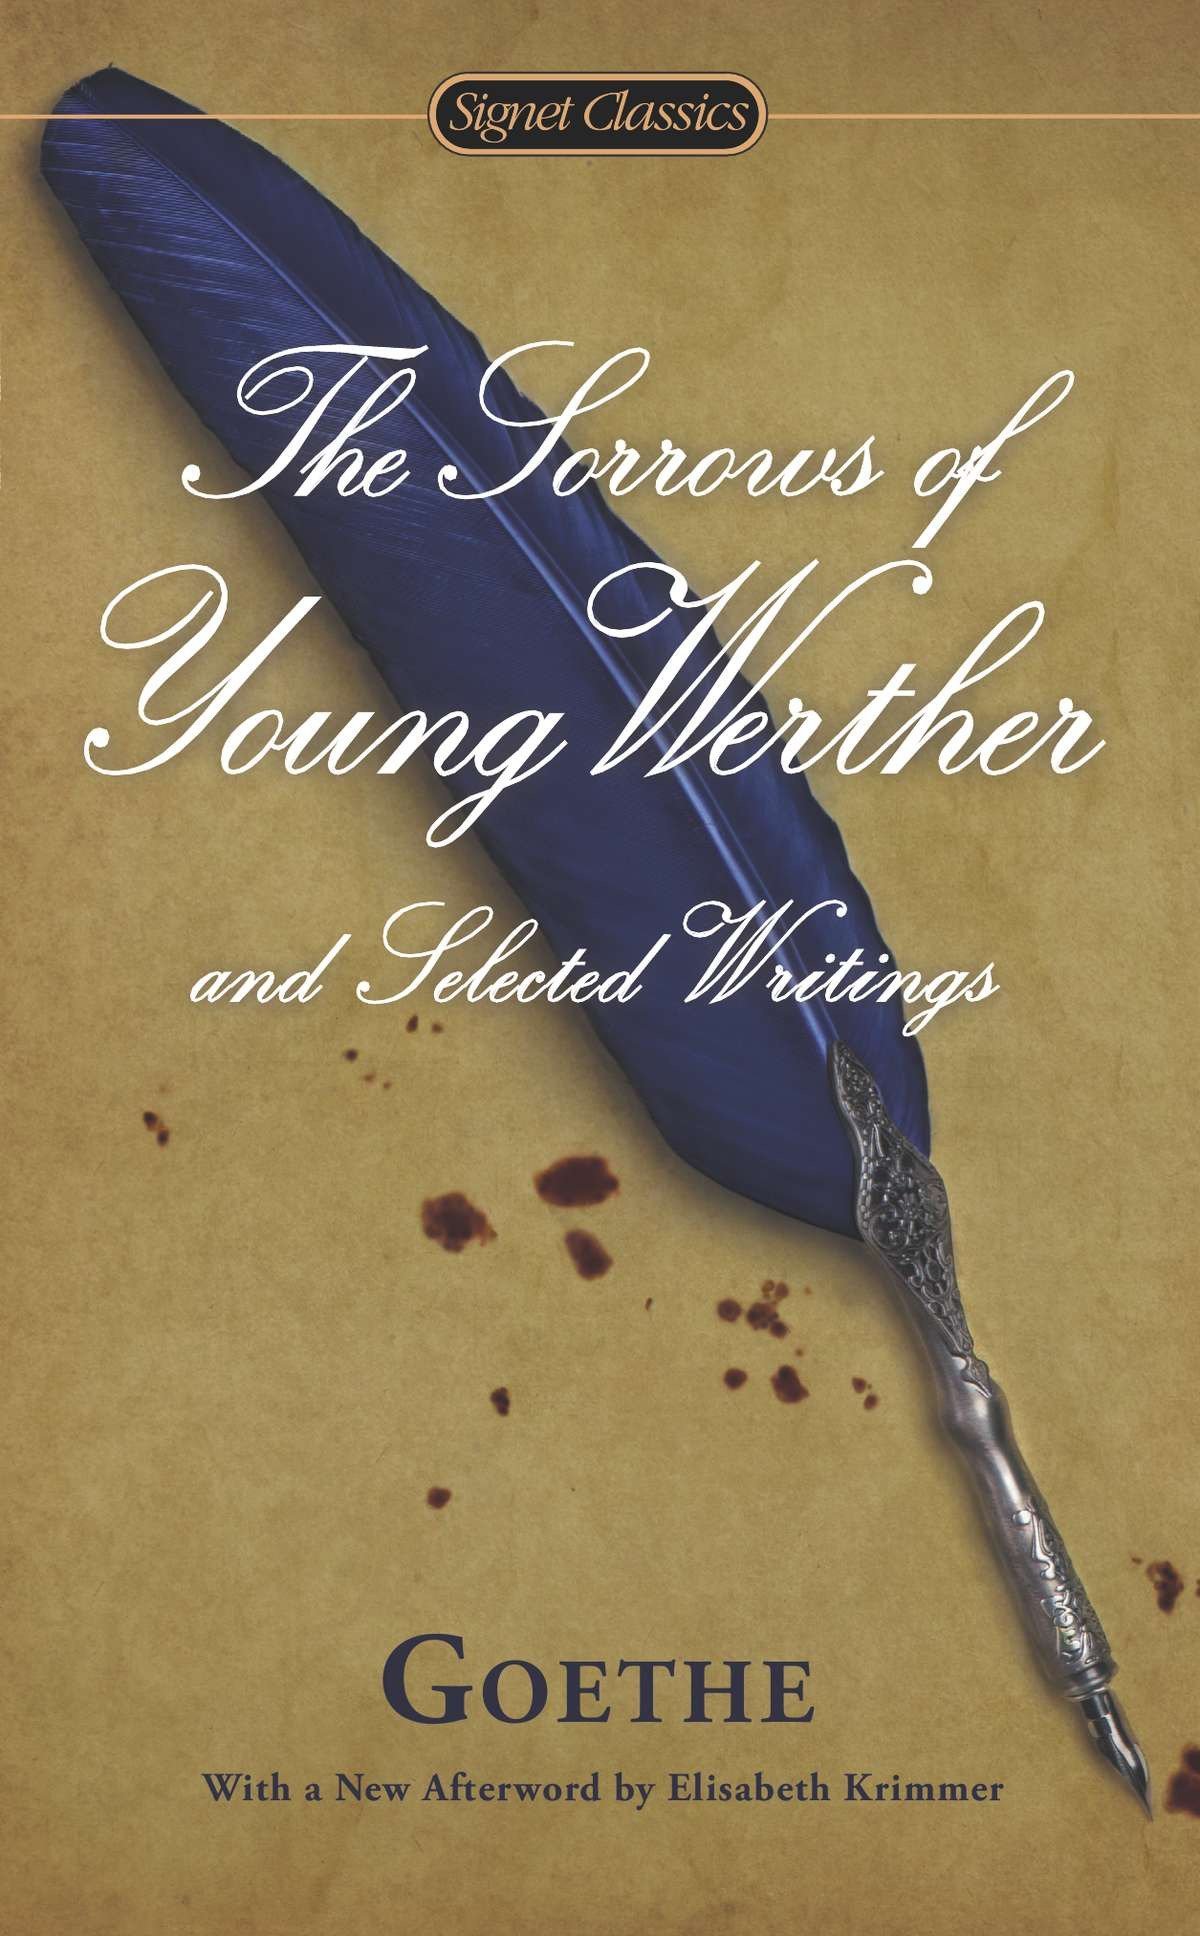 Johann Wolfgang von Goethe: The sorrows of young Werther (2005, Modern Library)